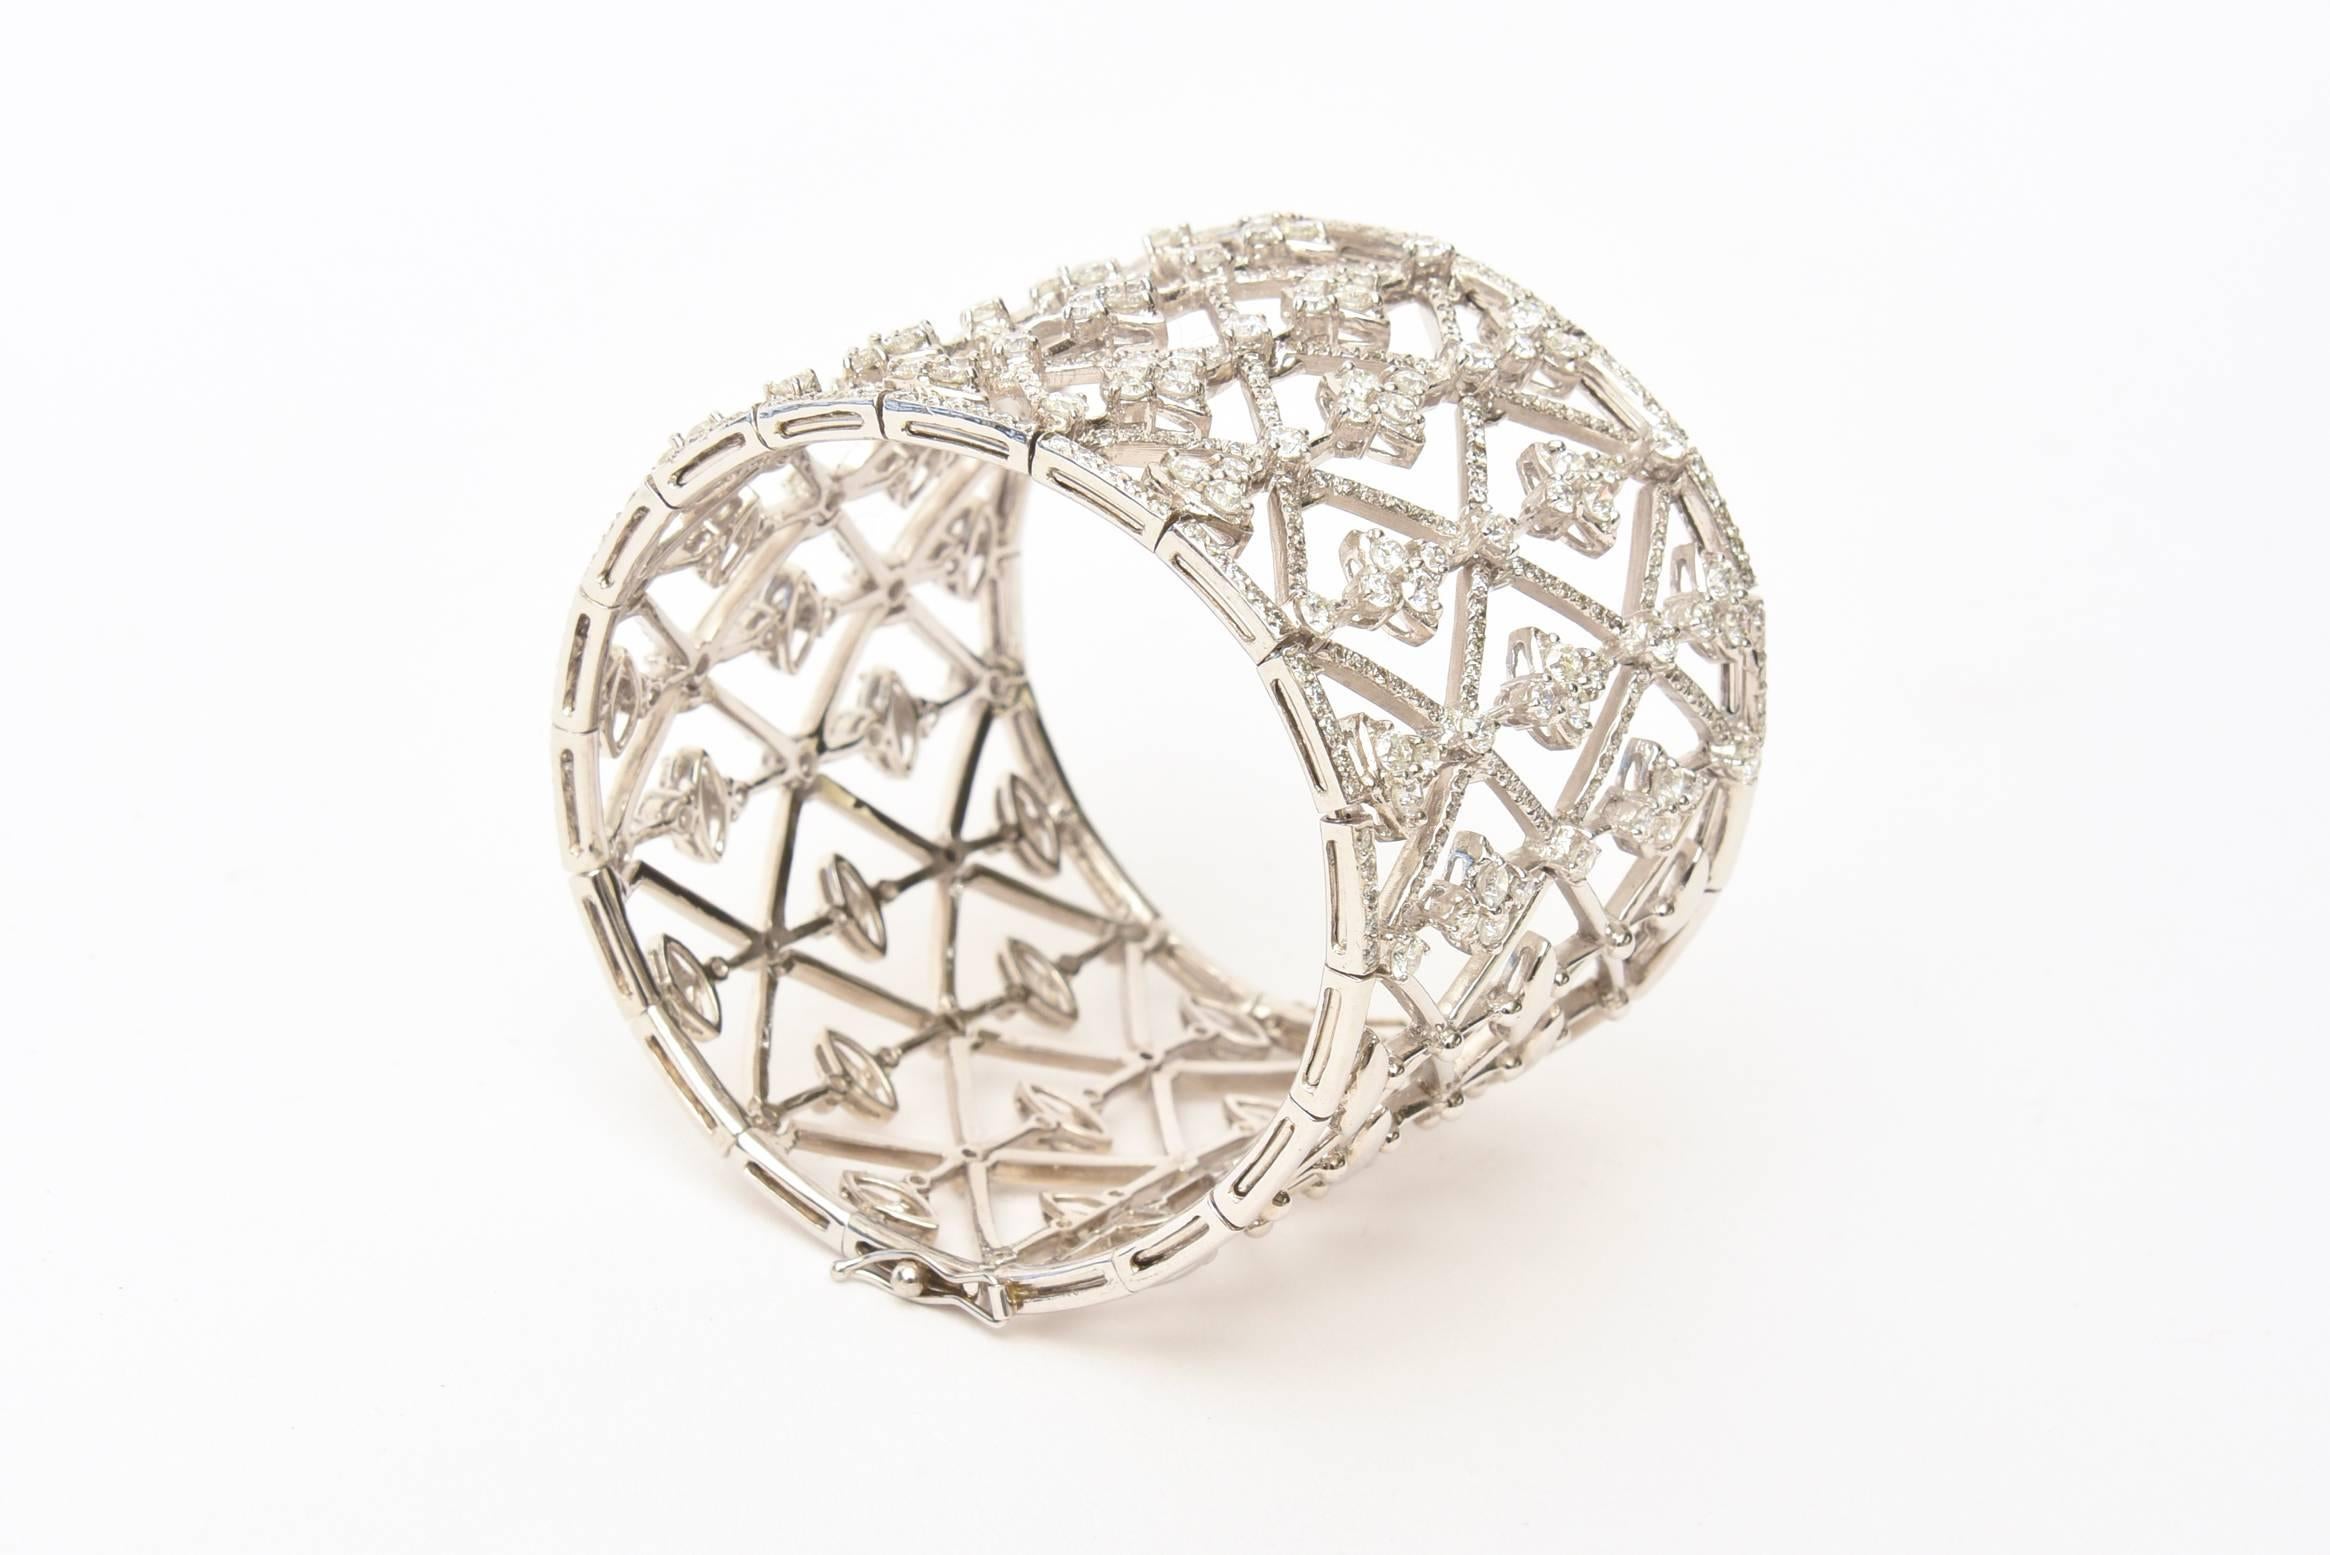 This gorgeous Italian wide cuff bracelet is18 K white gold that contains 473 pave set round brilliant cut diamonds that weigh approx 8.90 carat total.It has a lovely geometric pattern. 
It has f/g color and cvs/vs clarity. bracelet weighs 66